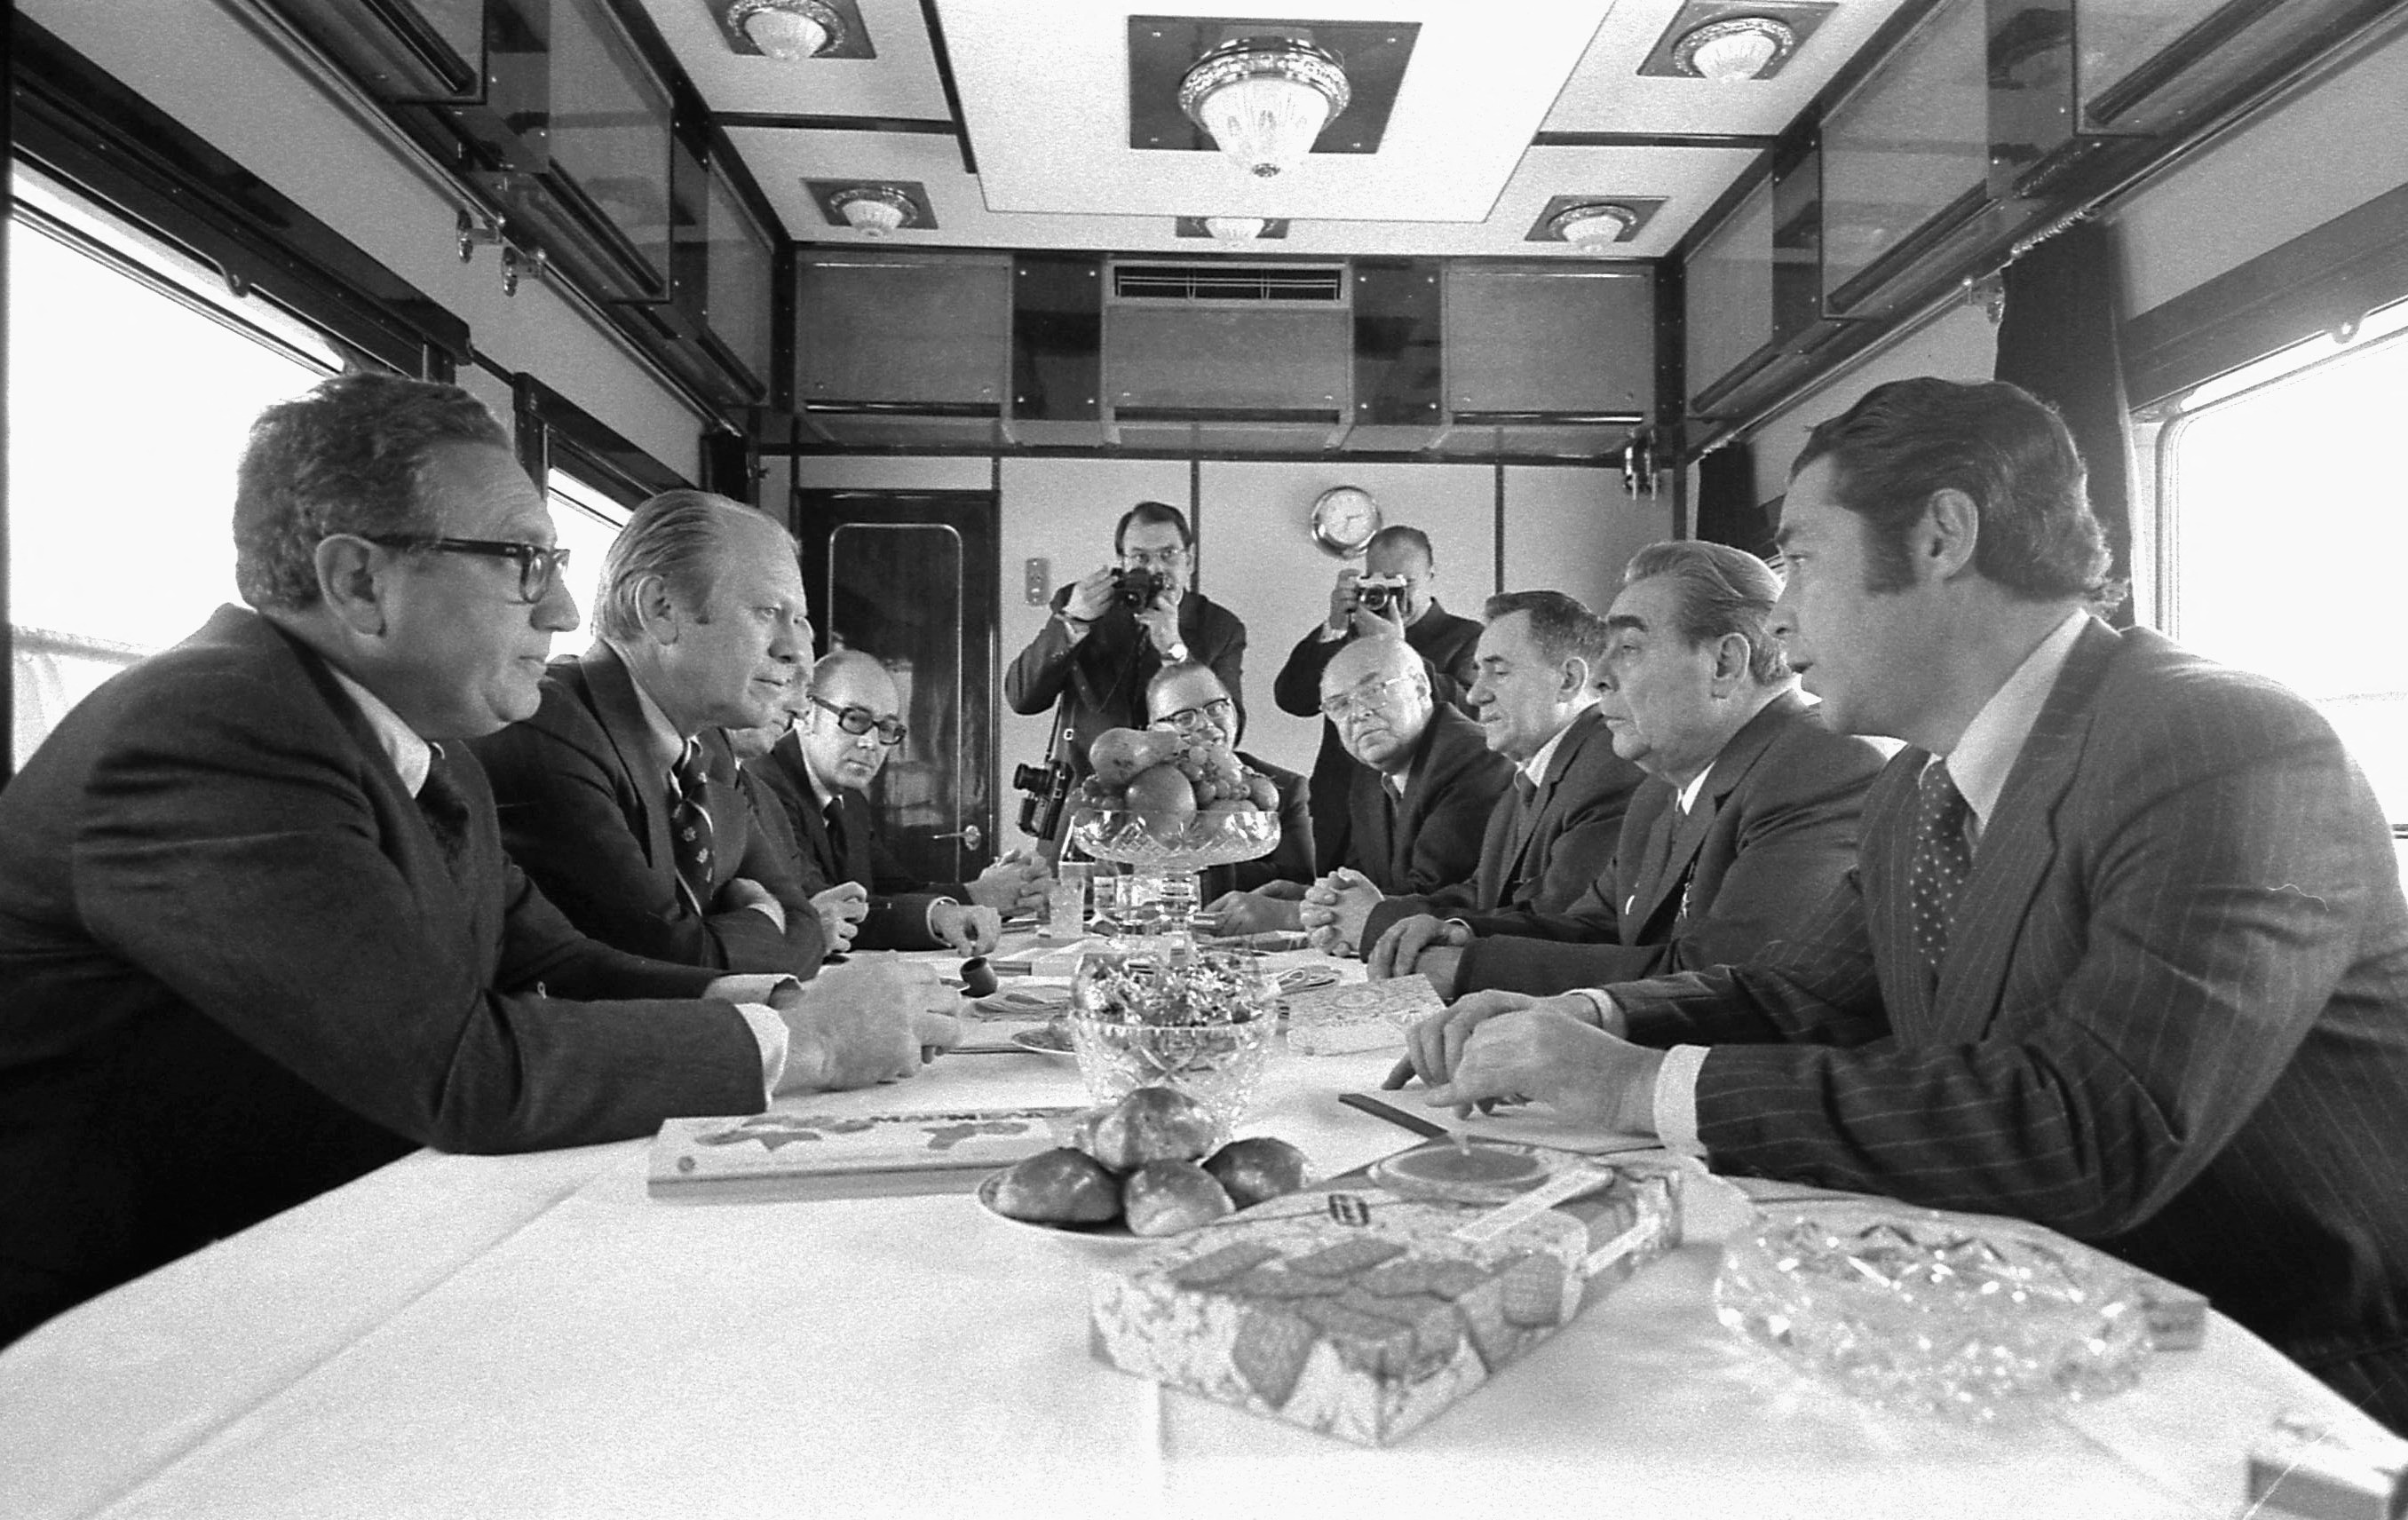 U.S. President Gerald Ford, Secretary of State Henry Kissinger and other U.S. representatives meet with Soviet General Secretary Brezhnev, Foreign Secretary Gromyko, Ambassador Dobrynin, and others aboard a Russian train headed for Vladivostok, Russia, November 23, 1974.  via Gerald R. Ford Library 